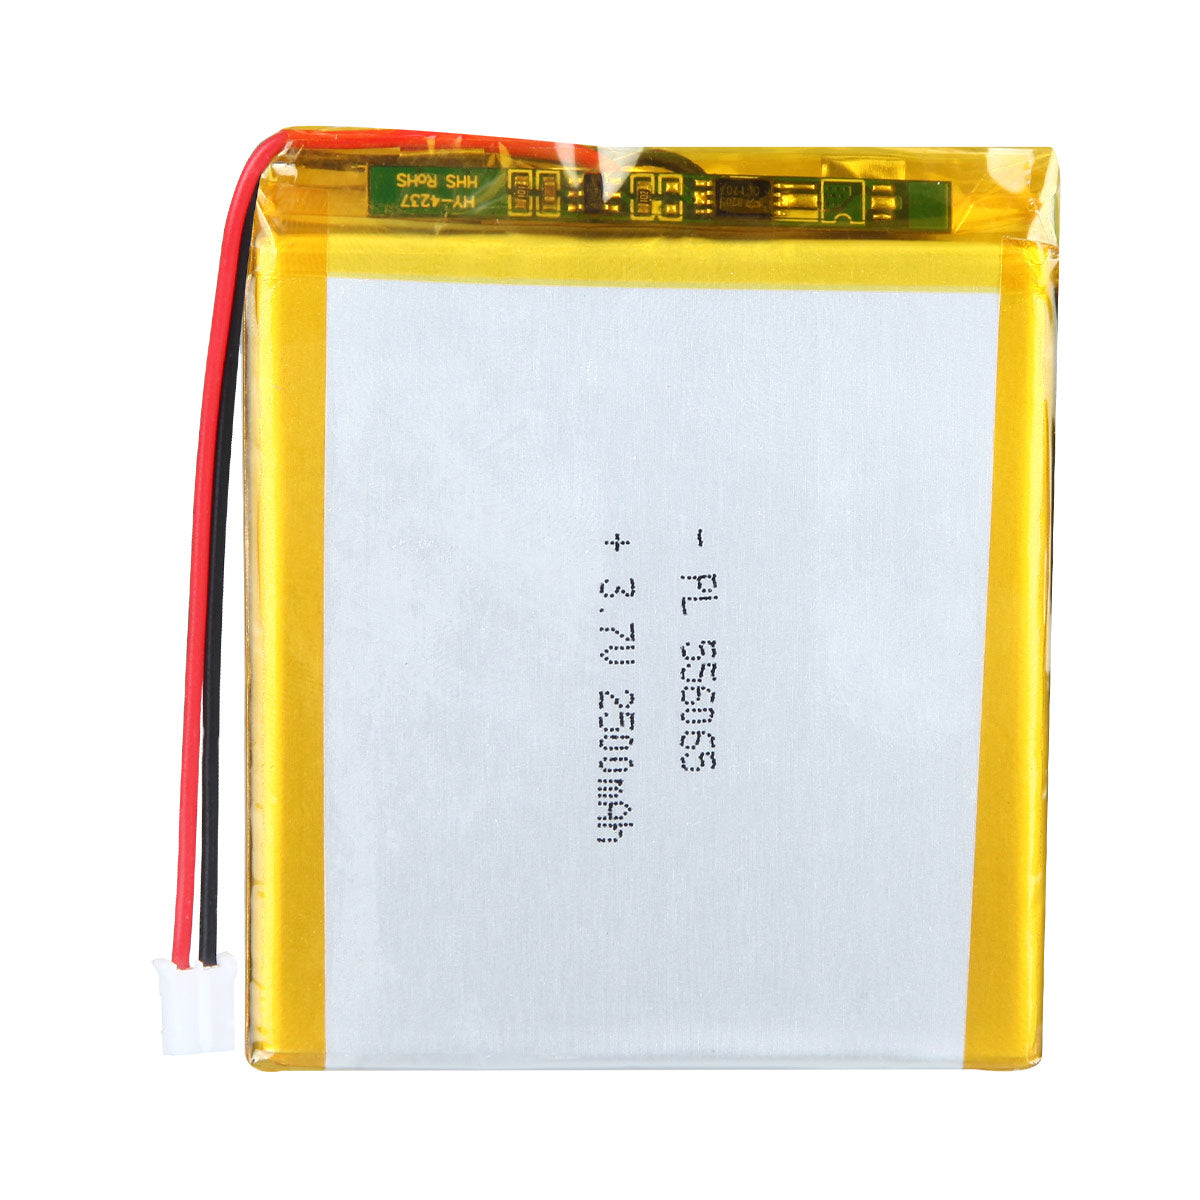 YDL 3.7V 2500mAh 556065 Rechargeable Lipo Battery with JST Connector - YDL Battery